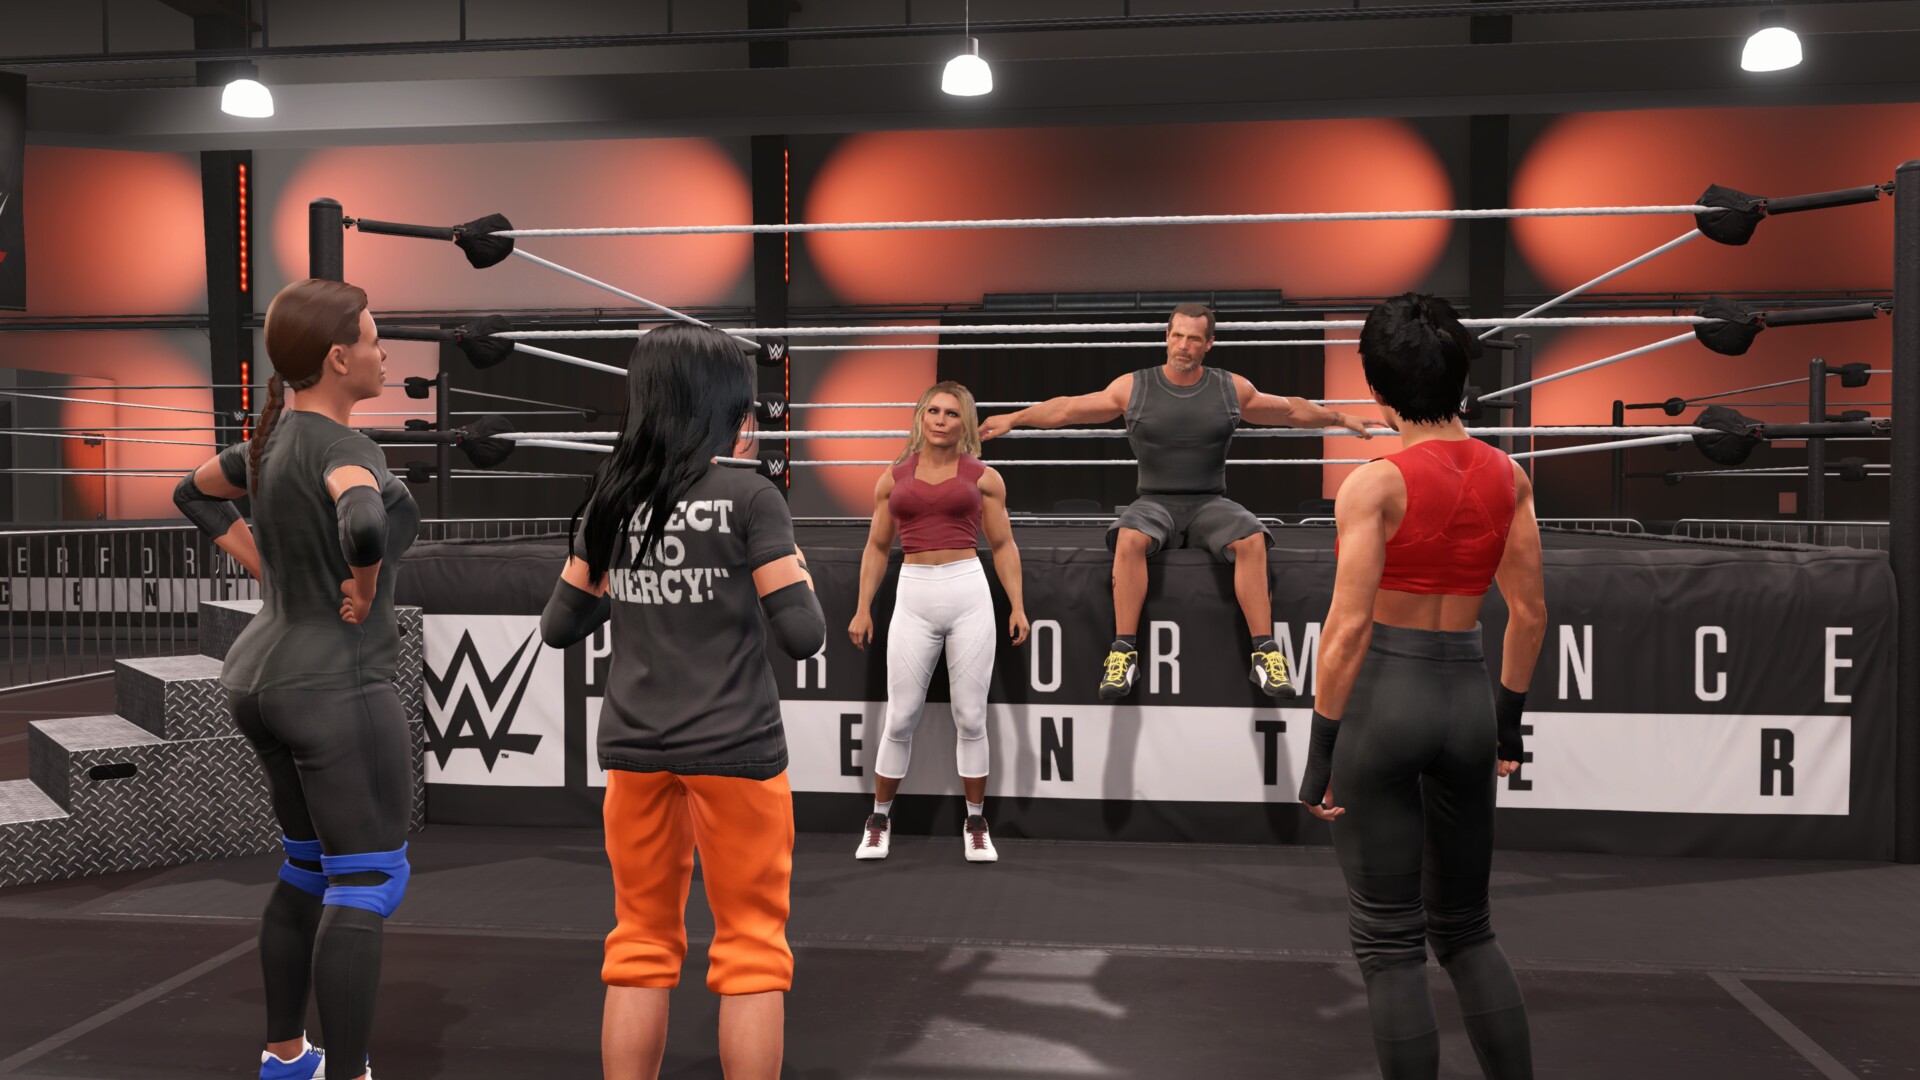 The WWE 2K22 roster features A LOT of released wrestlers